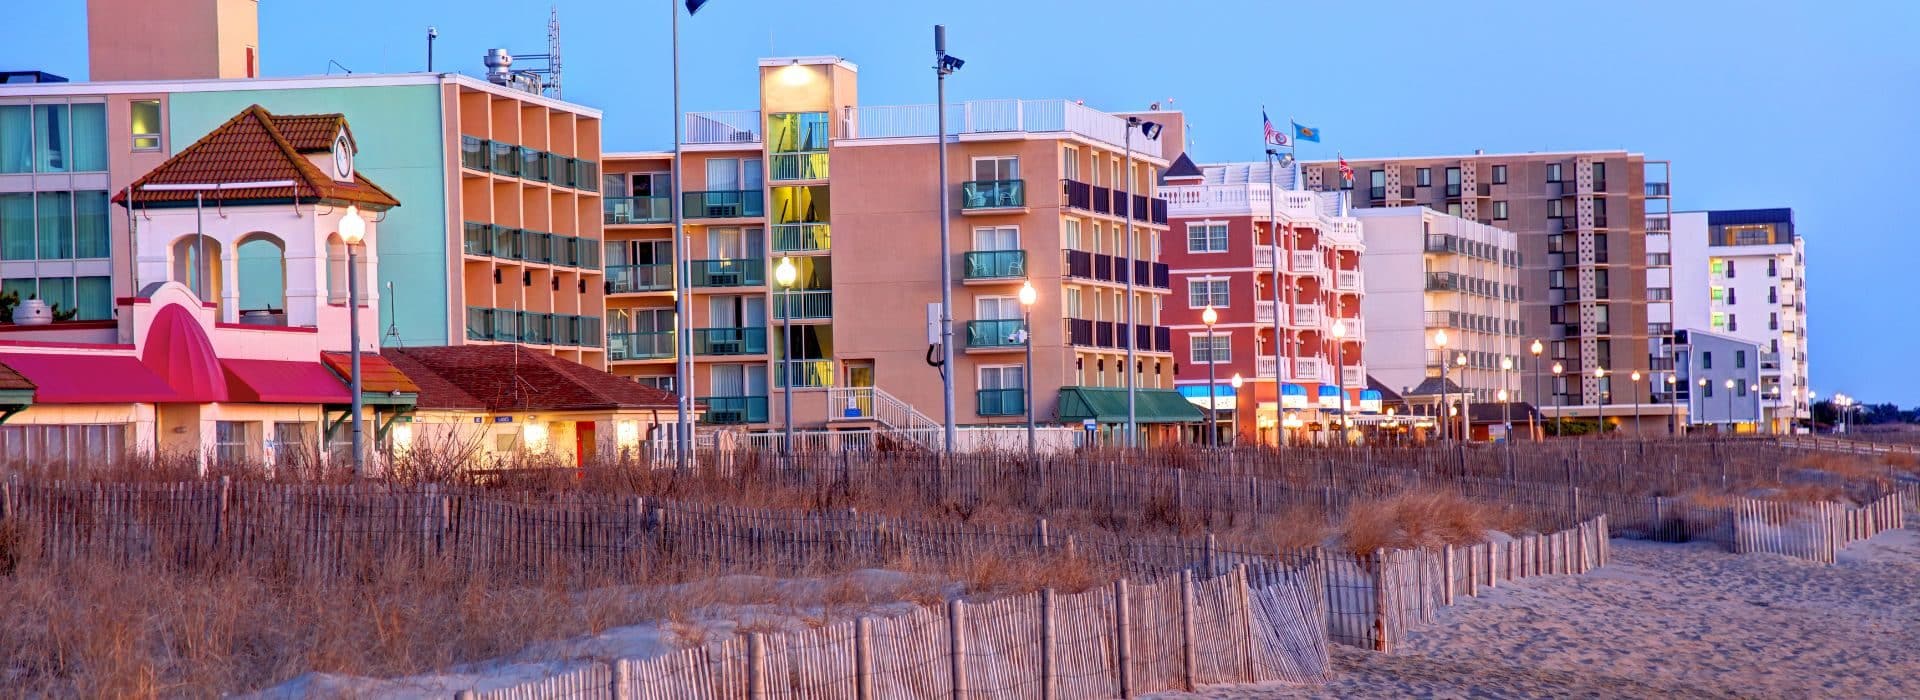 View of Rehoboth Beach from the water with colorful buildings along the beachfront.